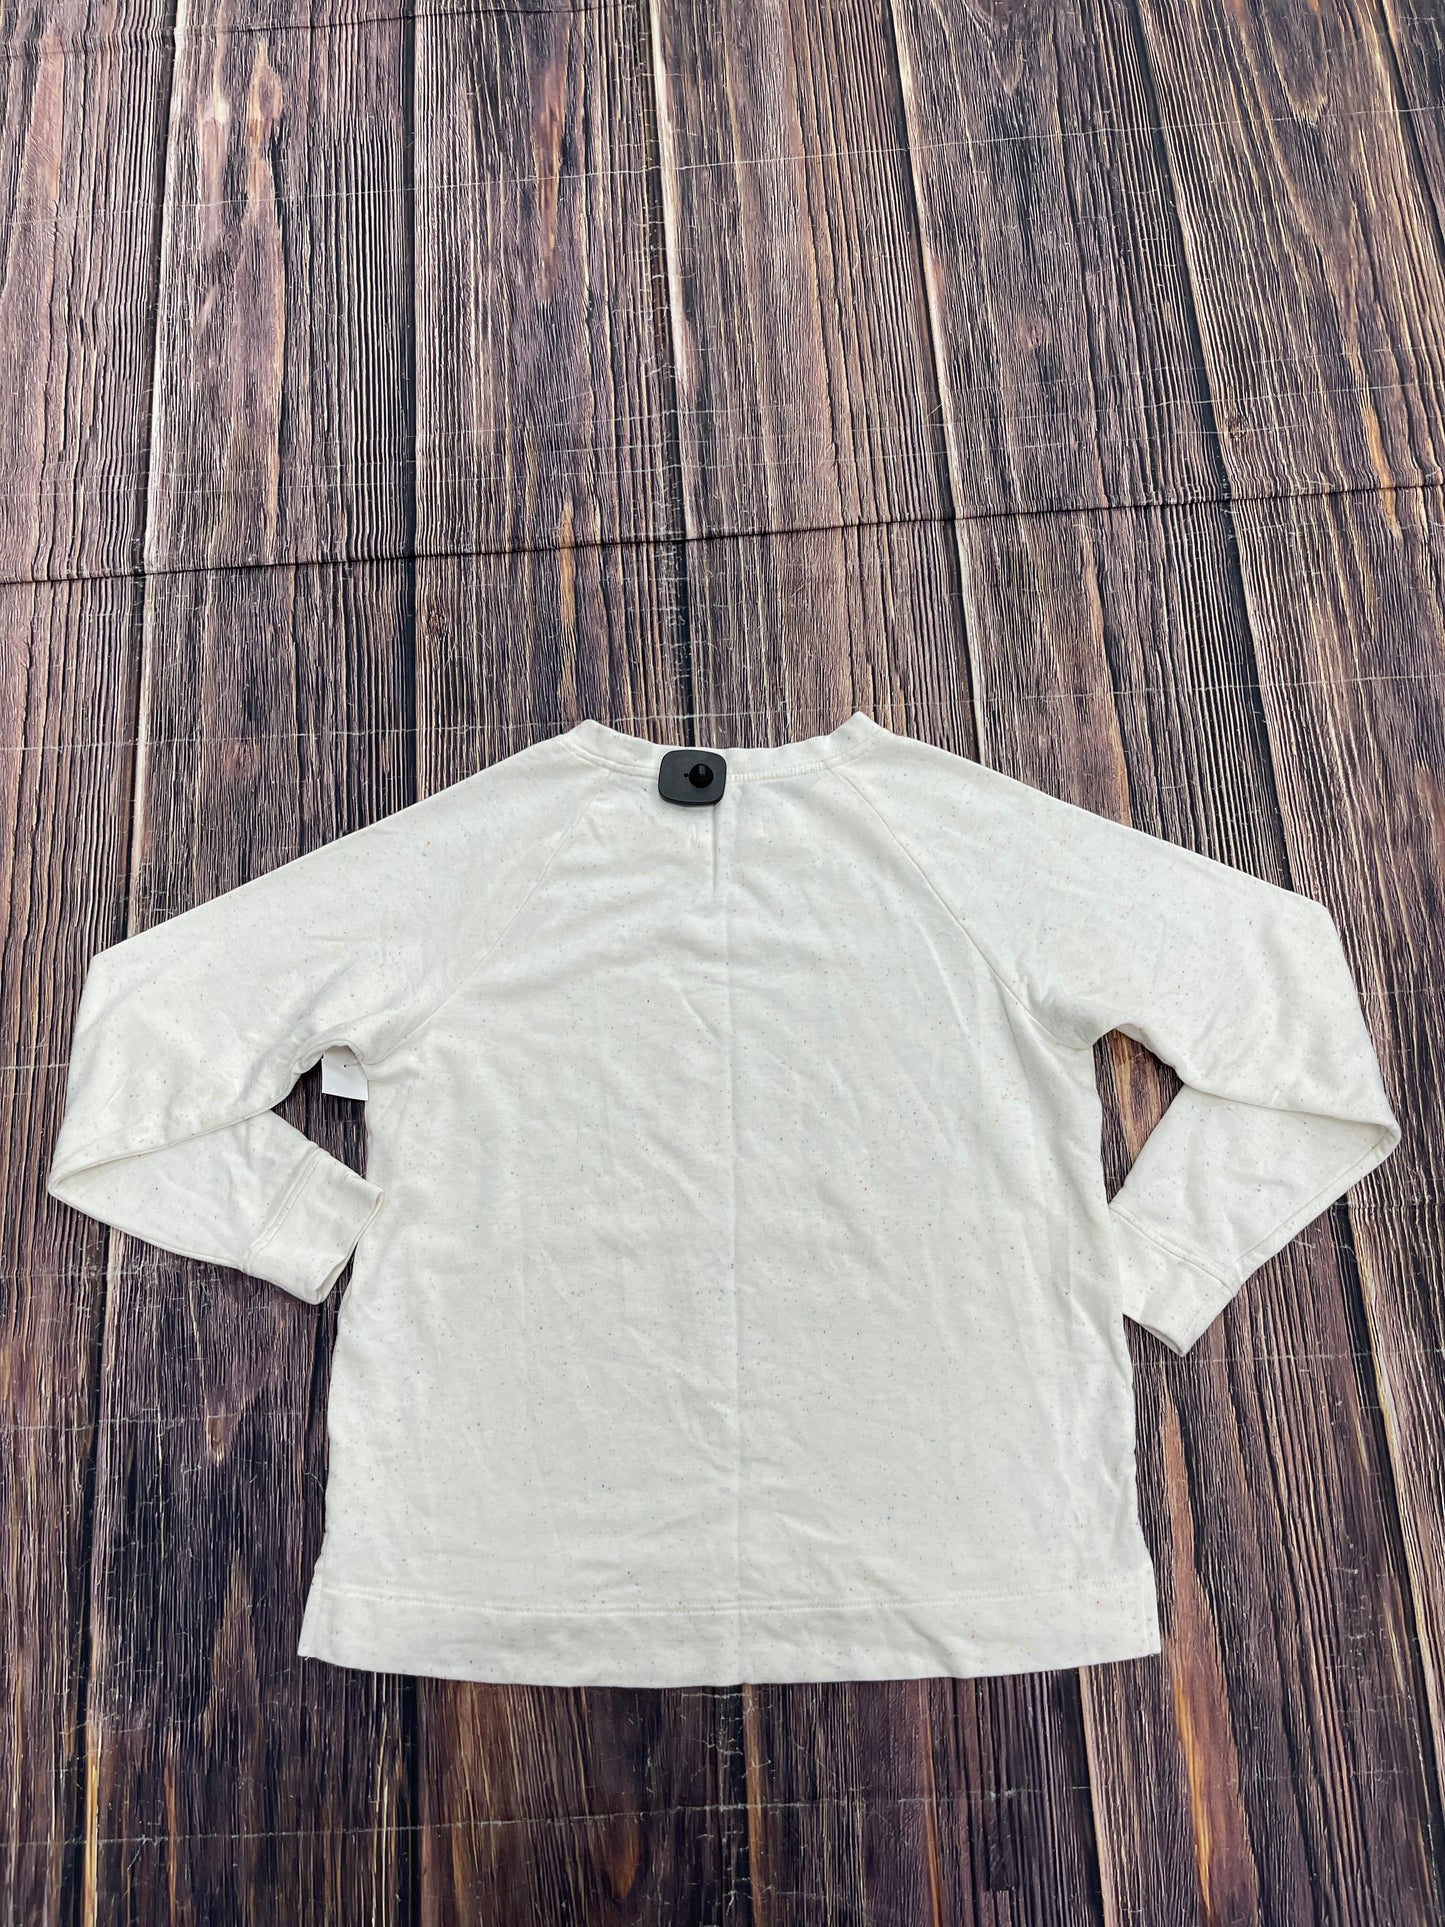 White Top Long Sleeve Lou And Grey, Size M